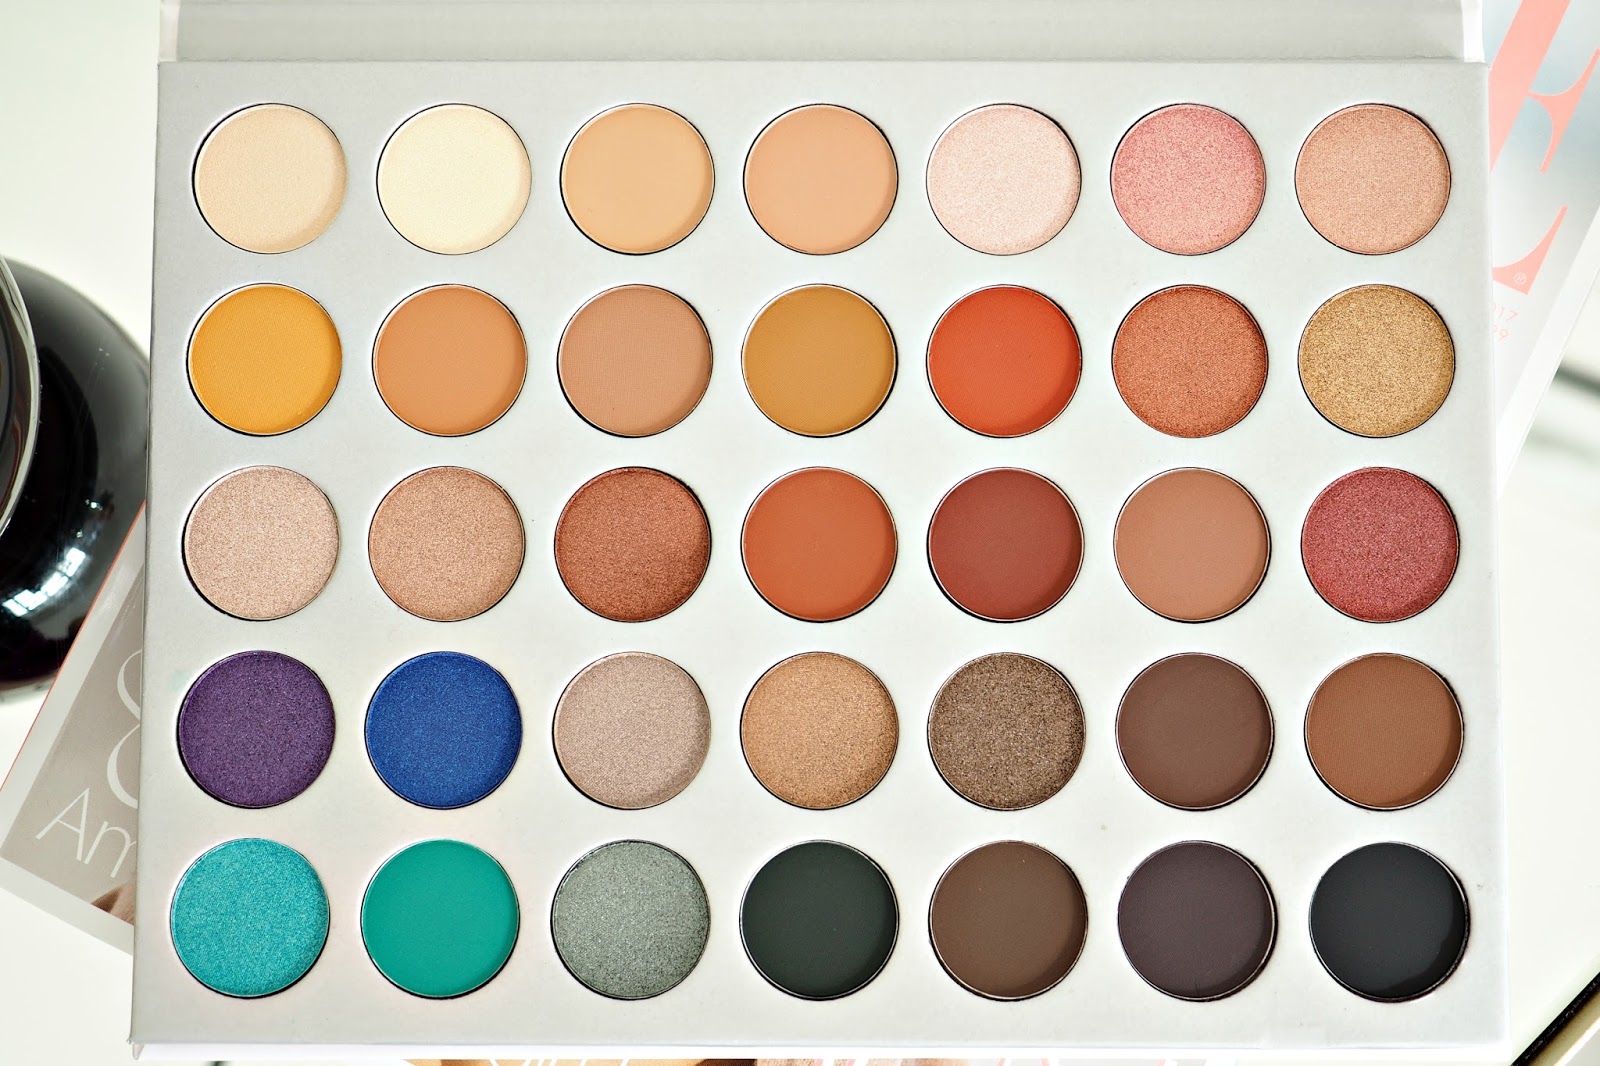 Morphe X Jaclyn Hill Eyeshadow Palette Review & Swatches